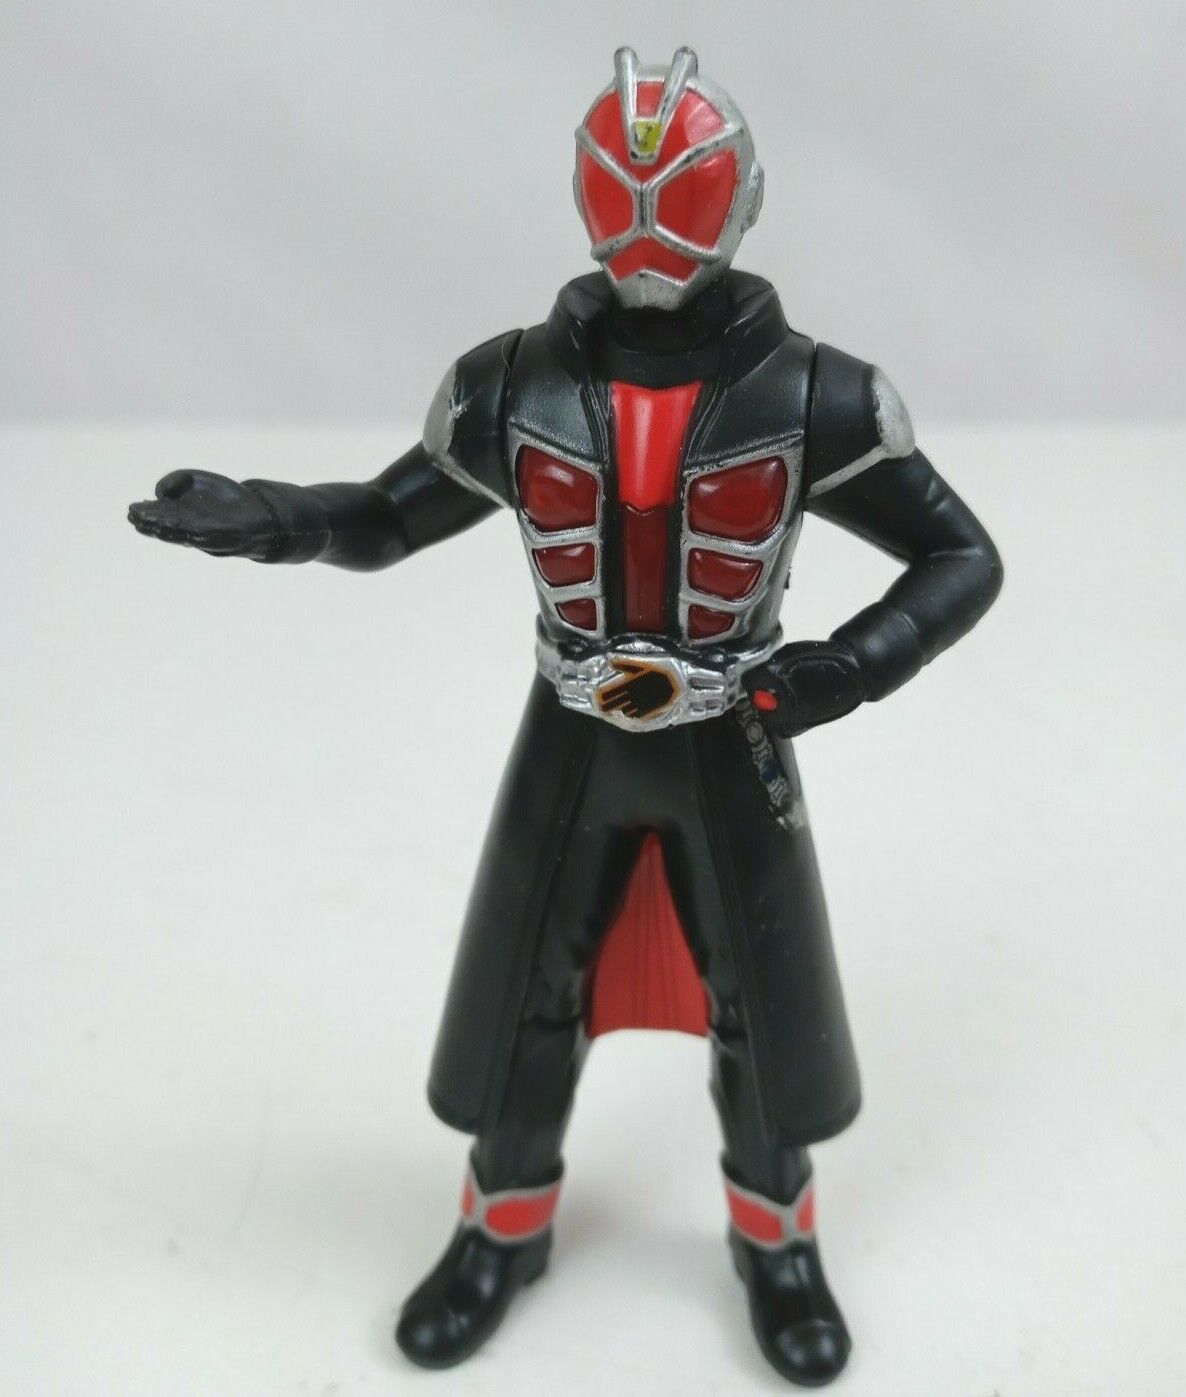 Primary image for Bandai Japan Kamen Rider Wizard Flame Style Dragon 3.75" Figure McDonald's Toy